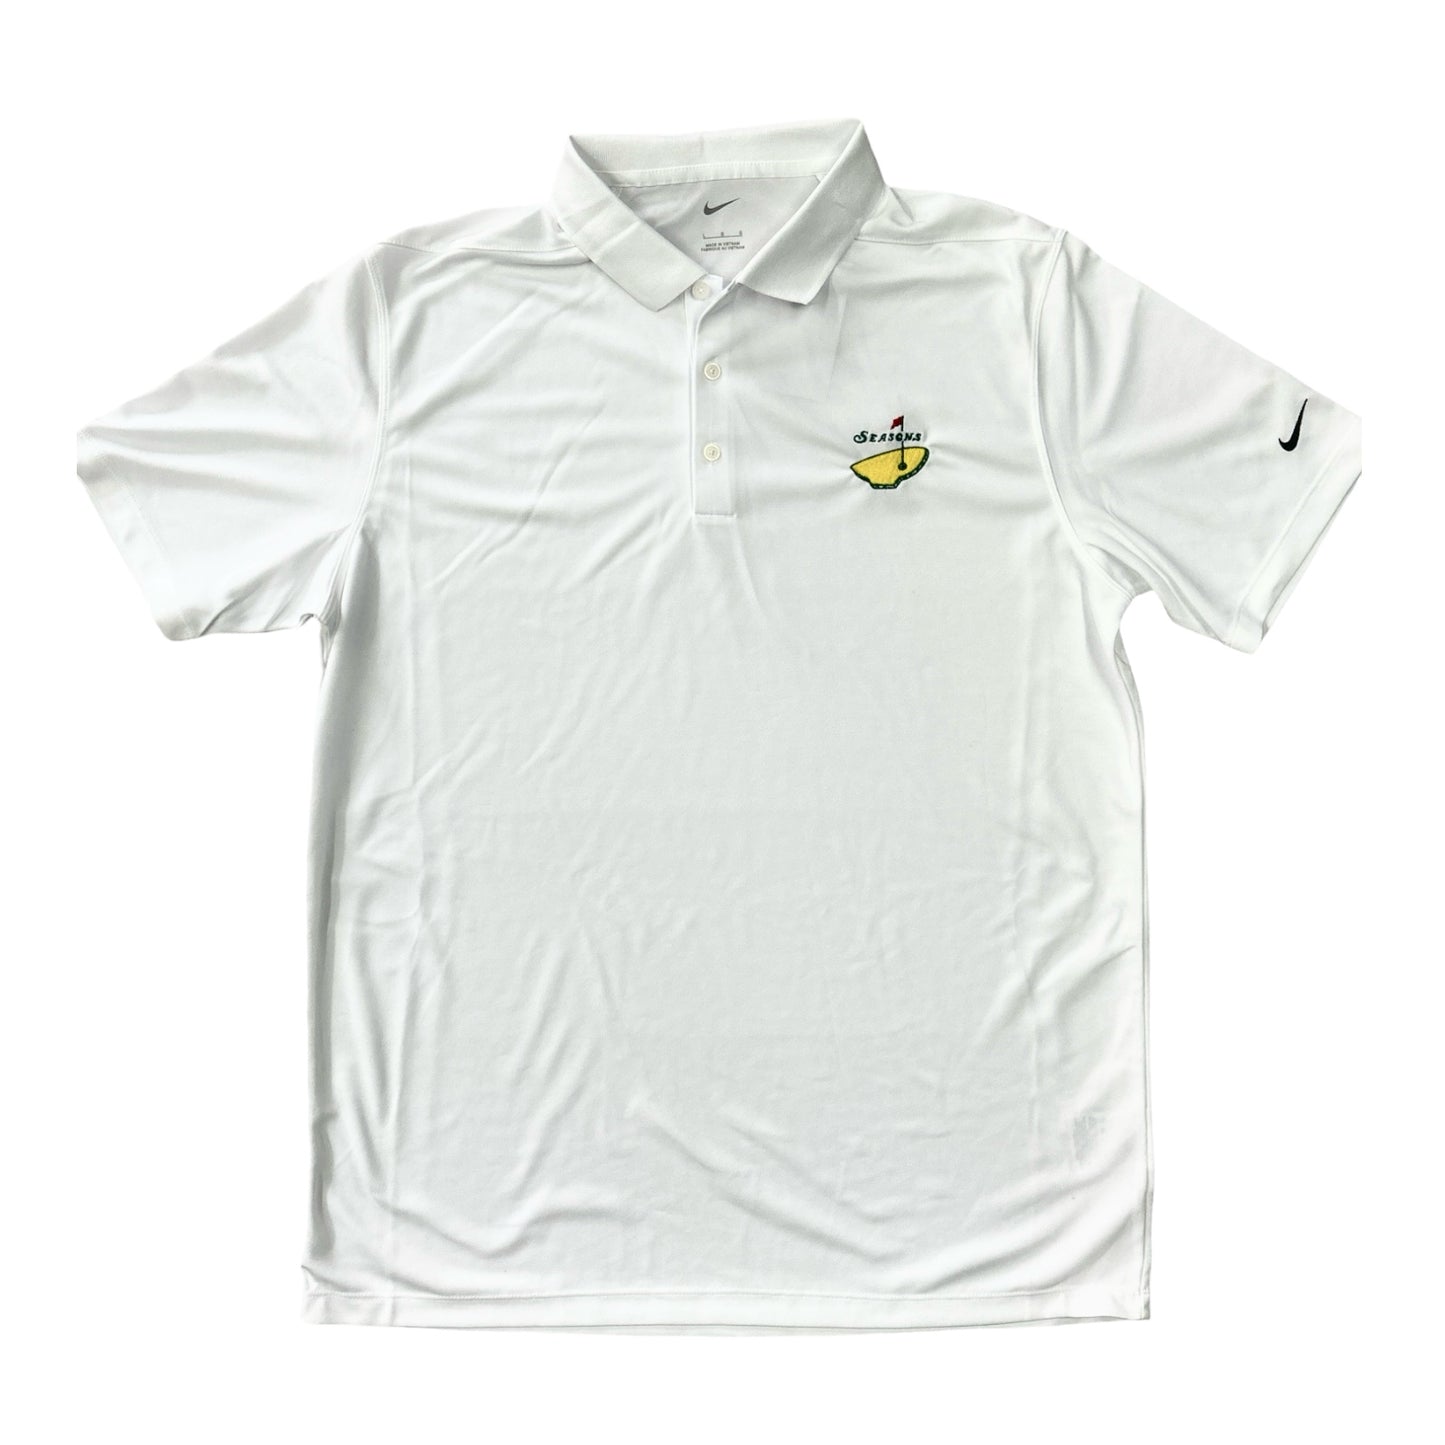 White Dri Fit Nike Polo with Embroidered Seasons Egg Logo on Left Chest